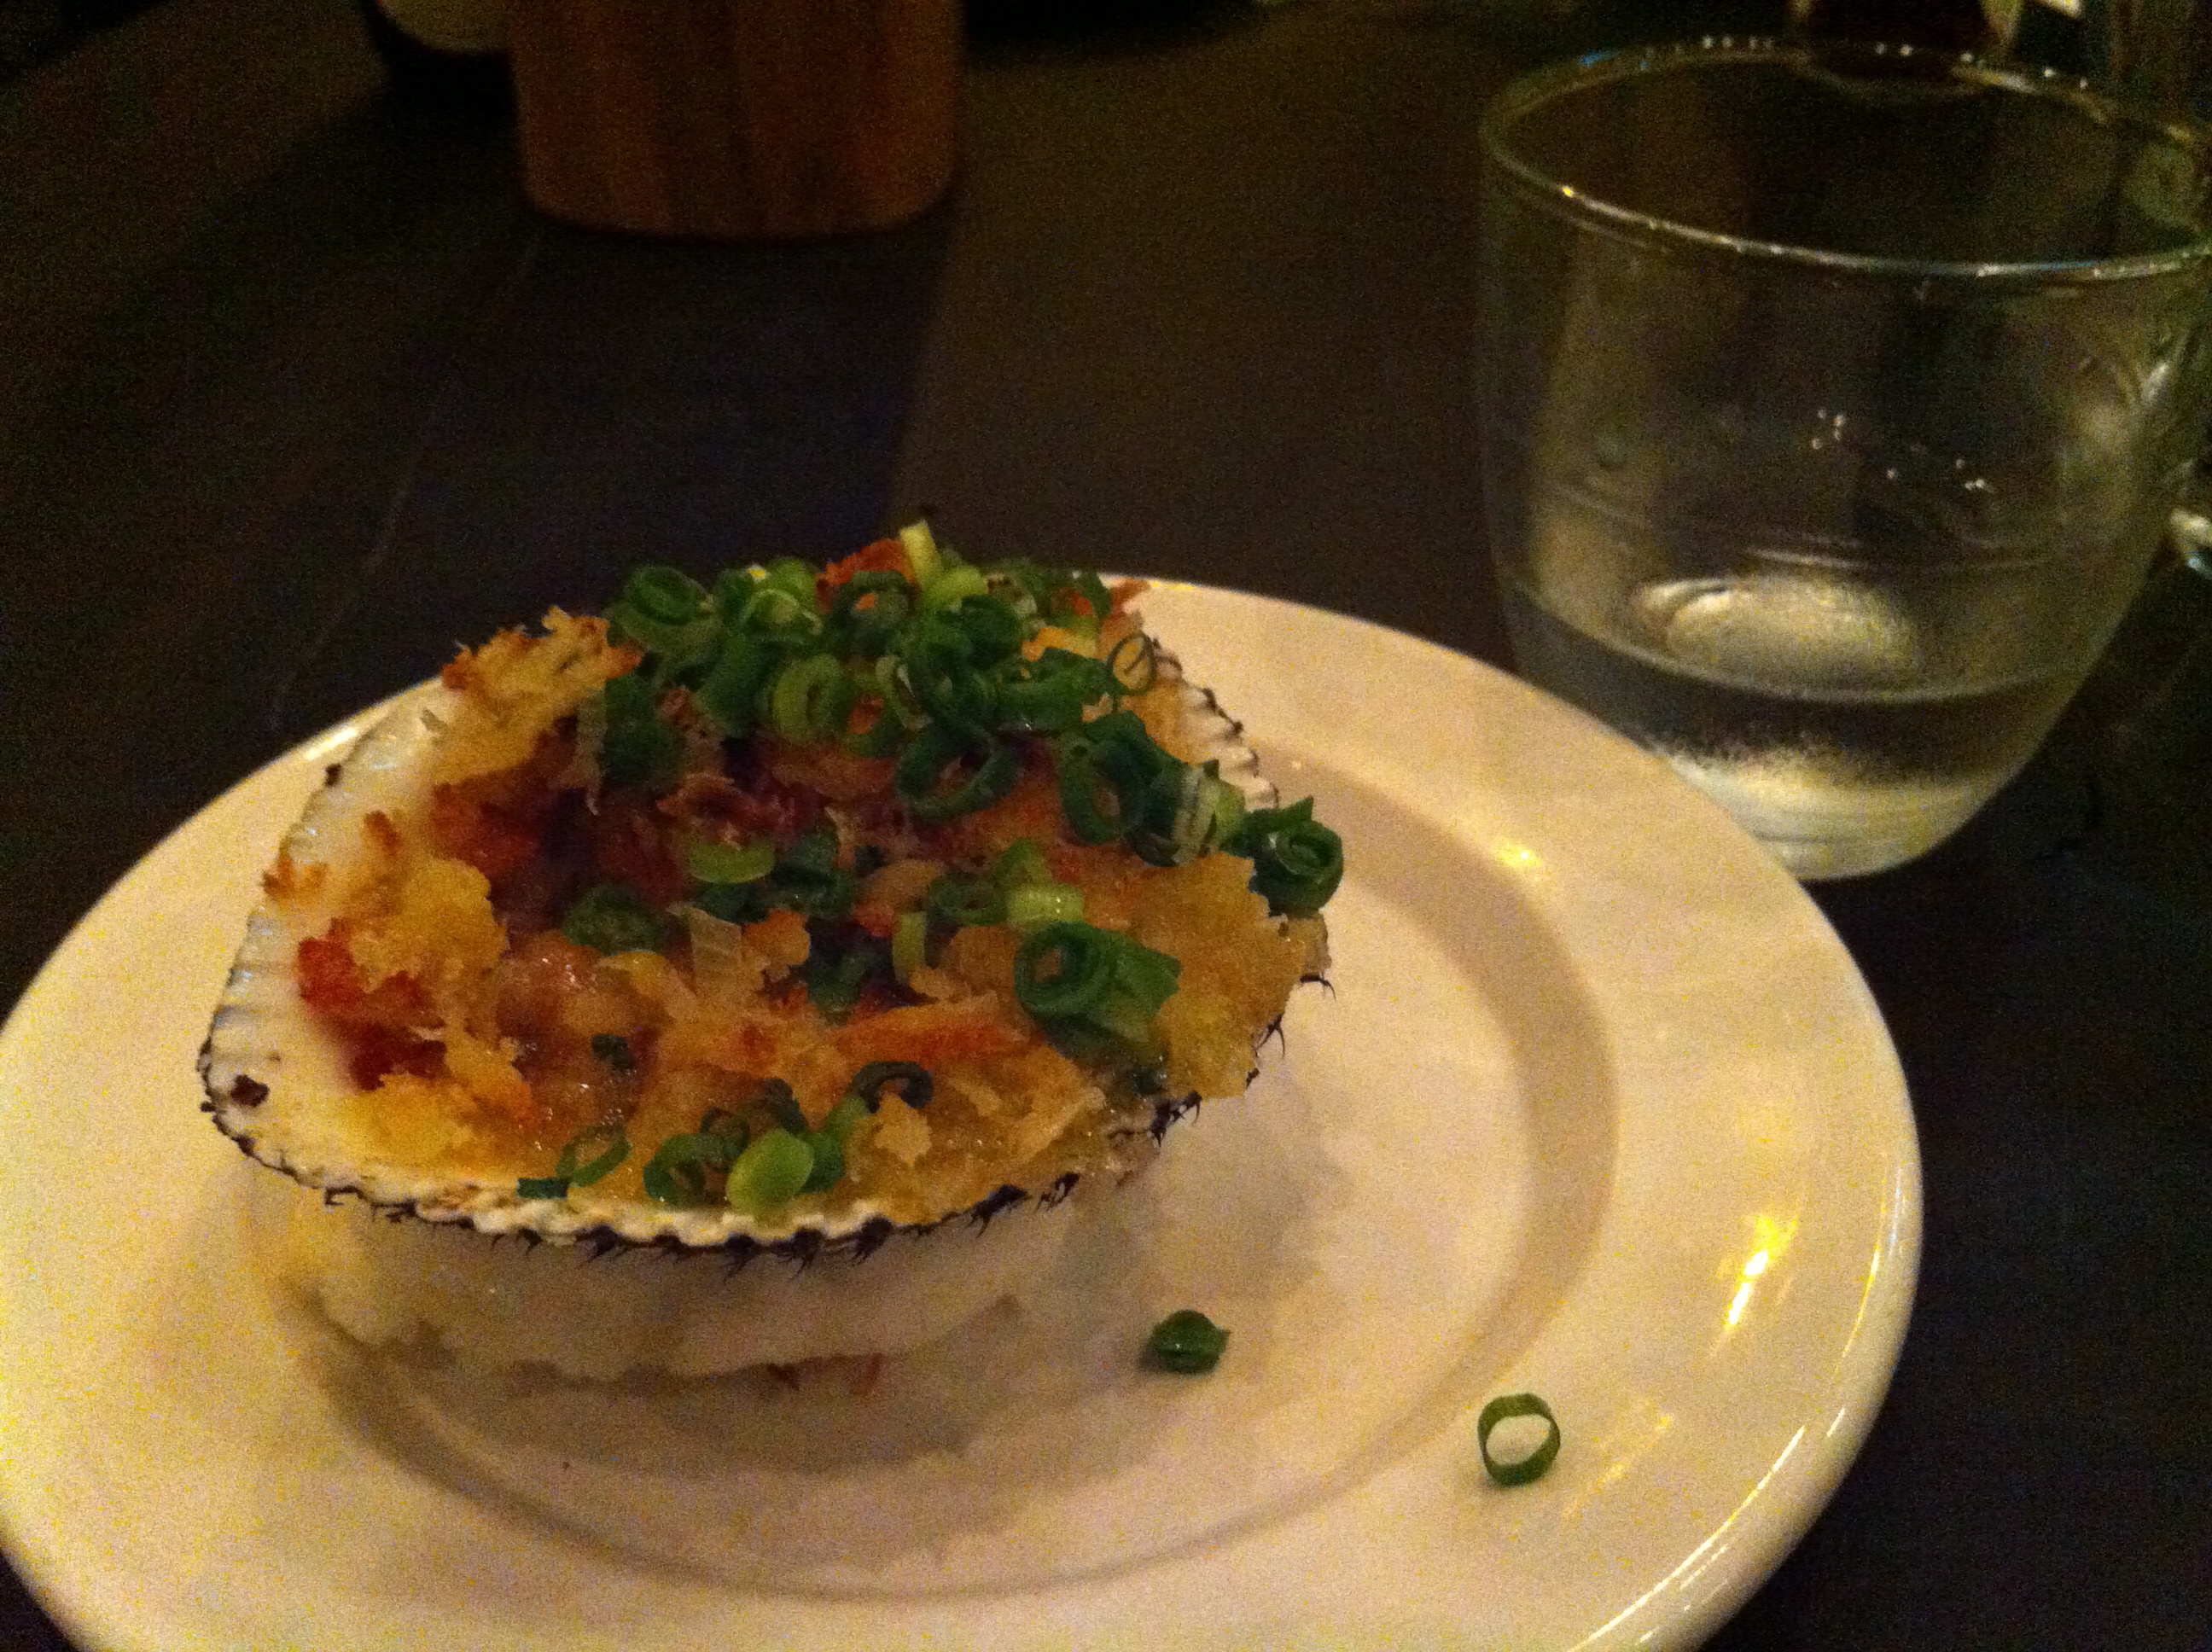 A bacon and panko-topped baked clam and a glass of the house namazake at Yardbird